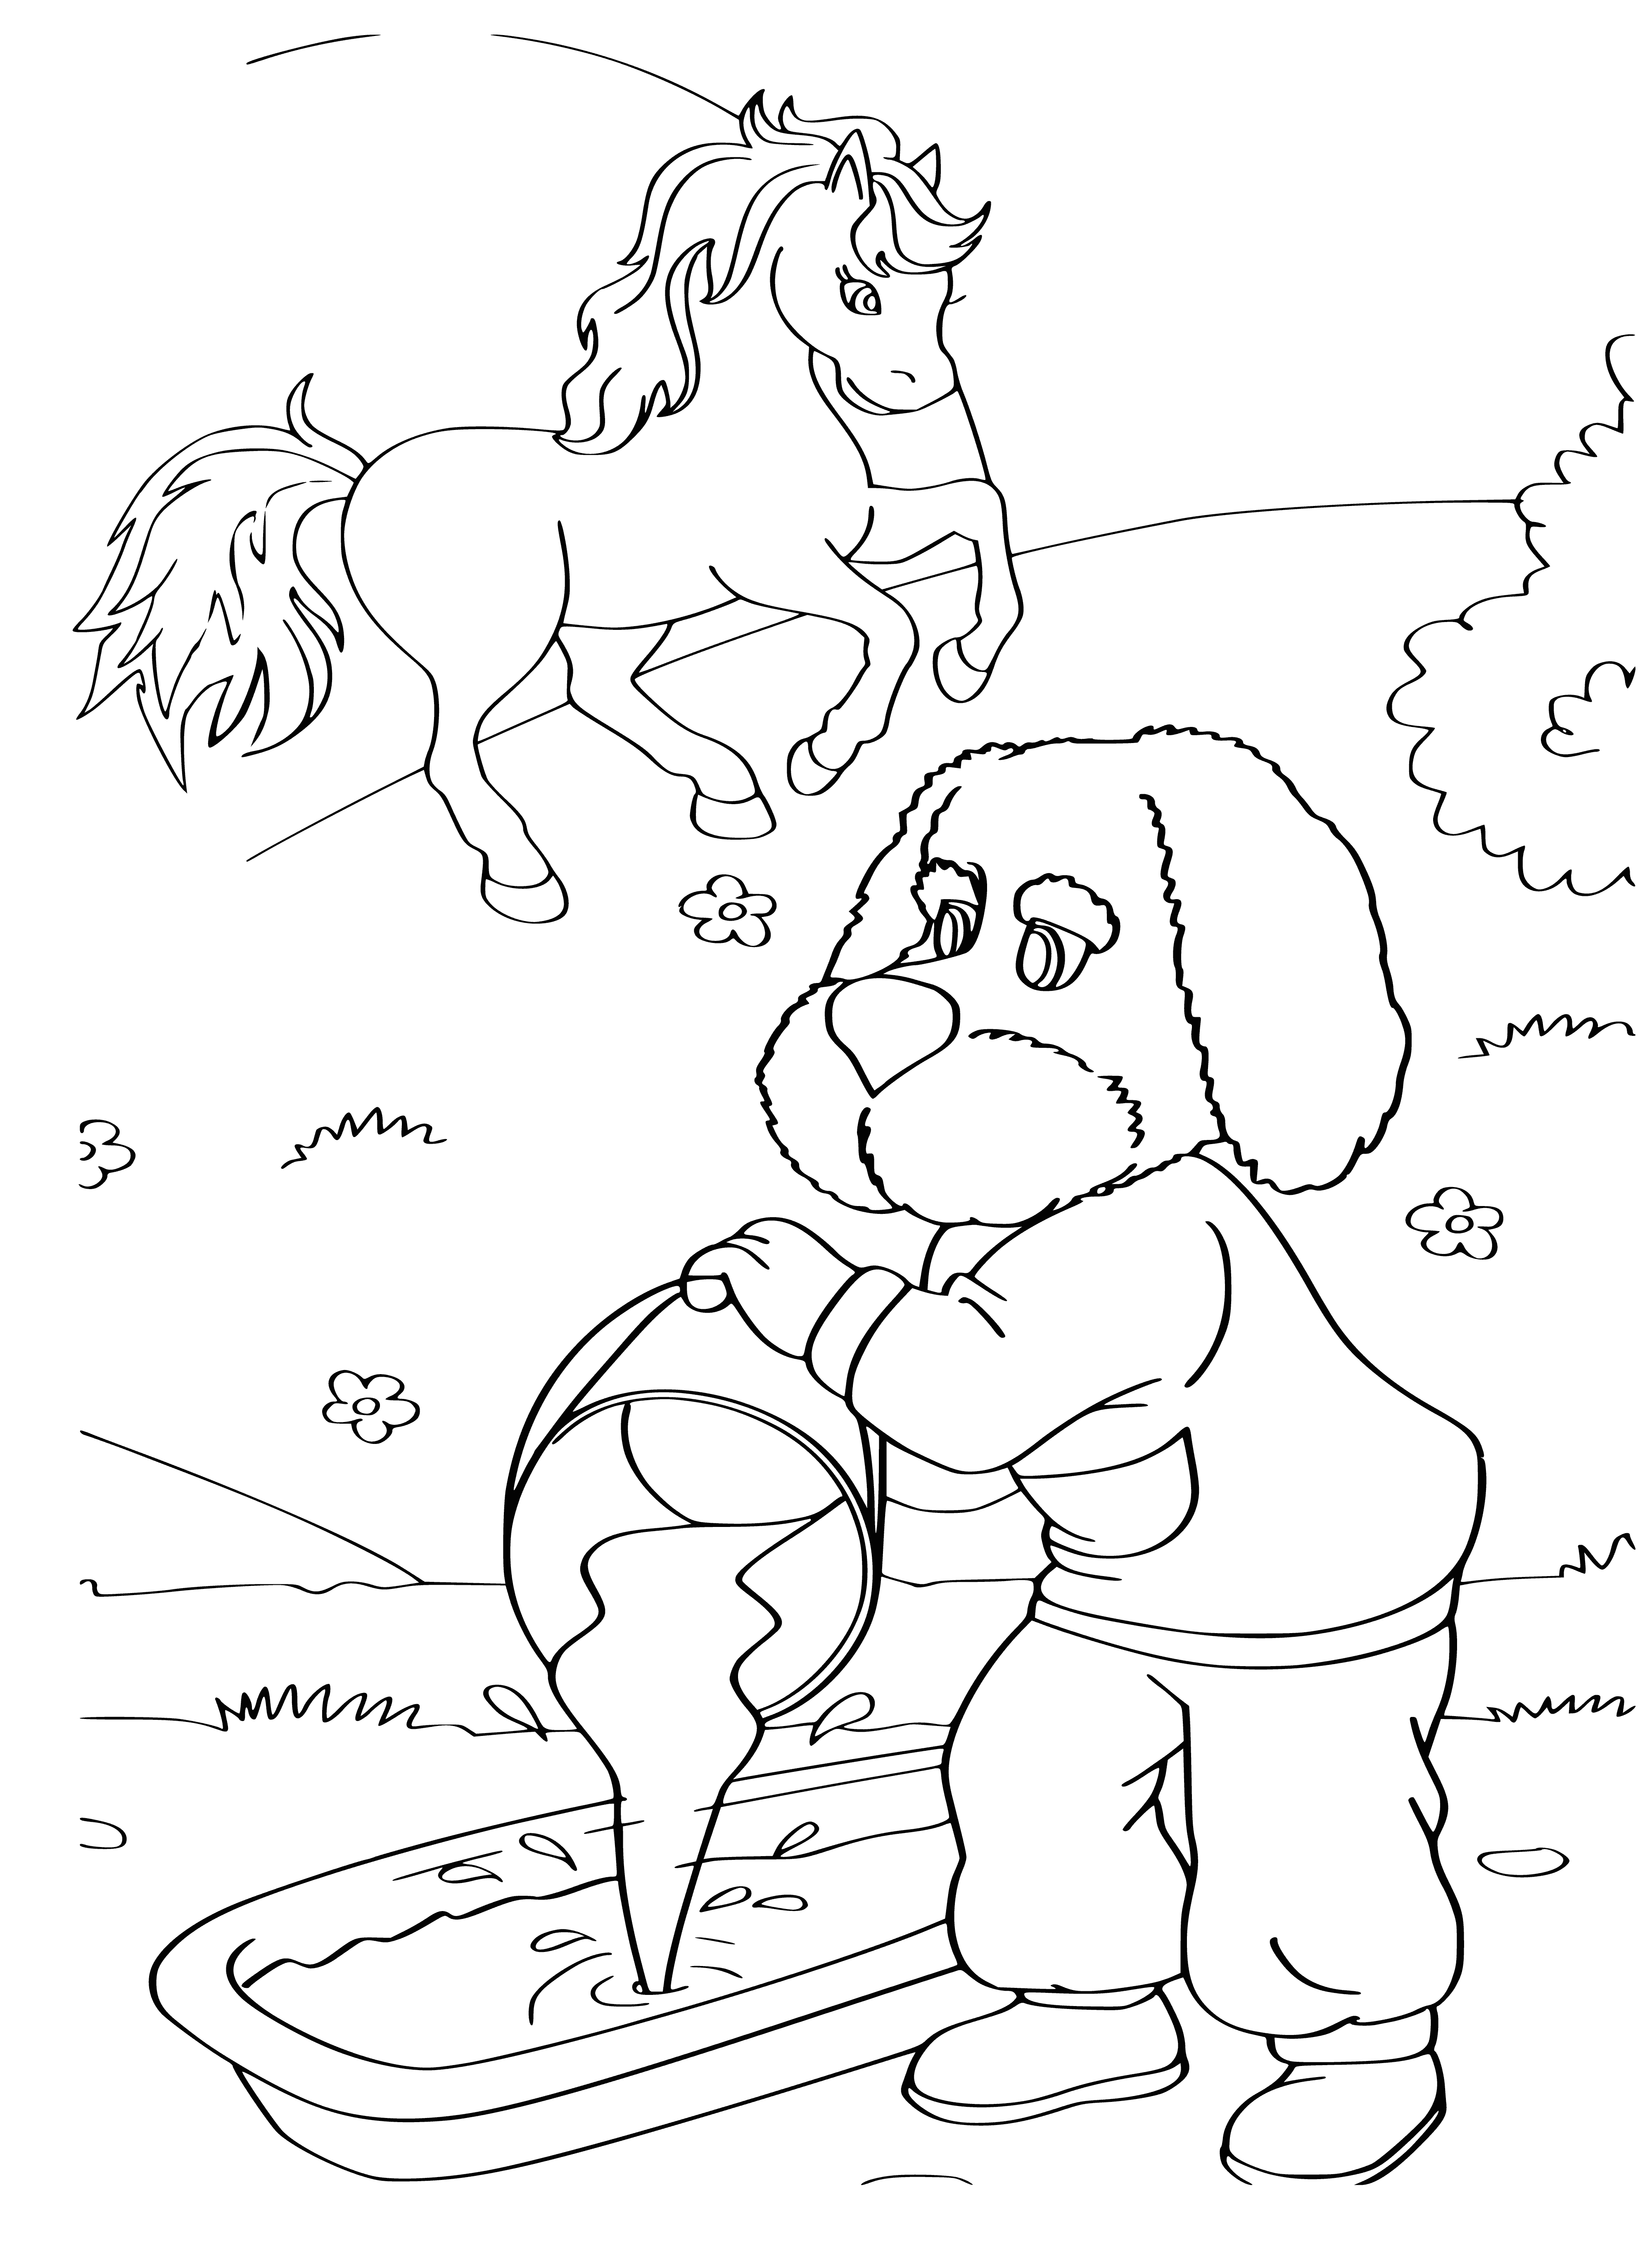 coloring page: Girl in field holds flowers & smiles at 3 children holding hands. A coloring page of happiness & friendship.  #coloringpage #friendship